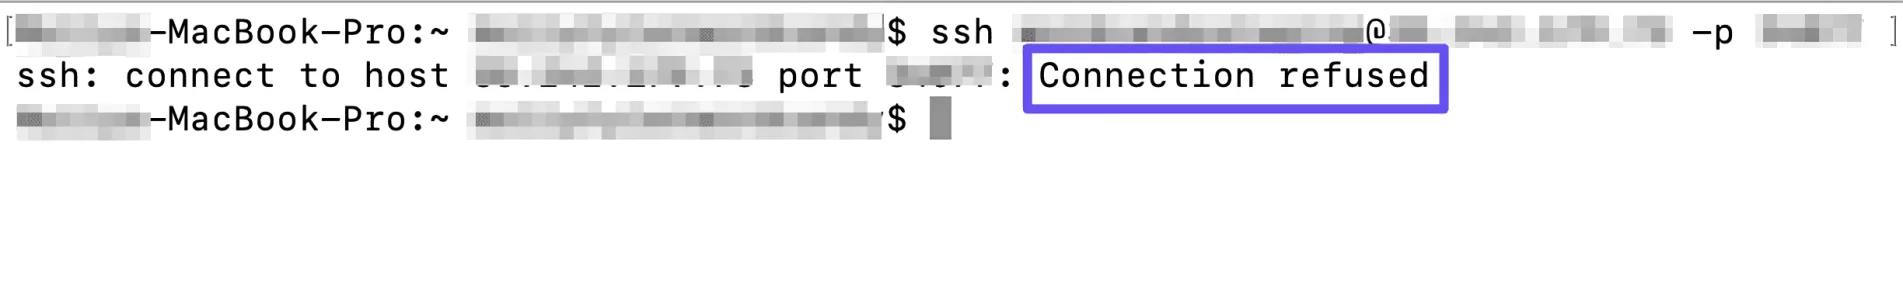 SSH Connection Refused